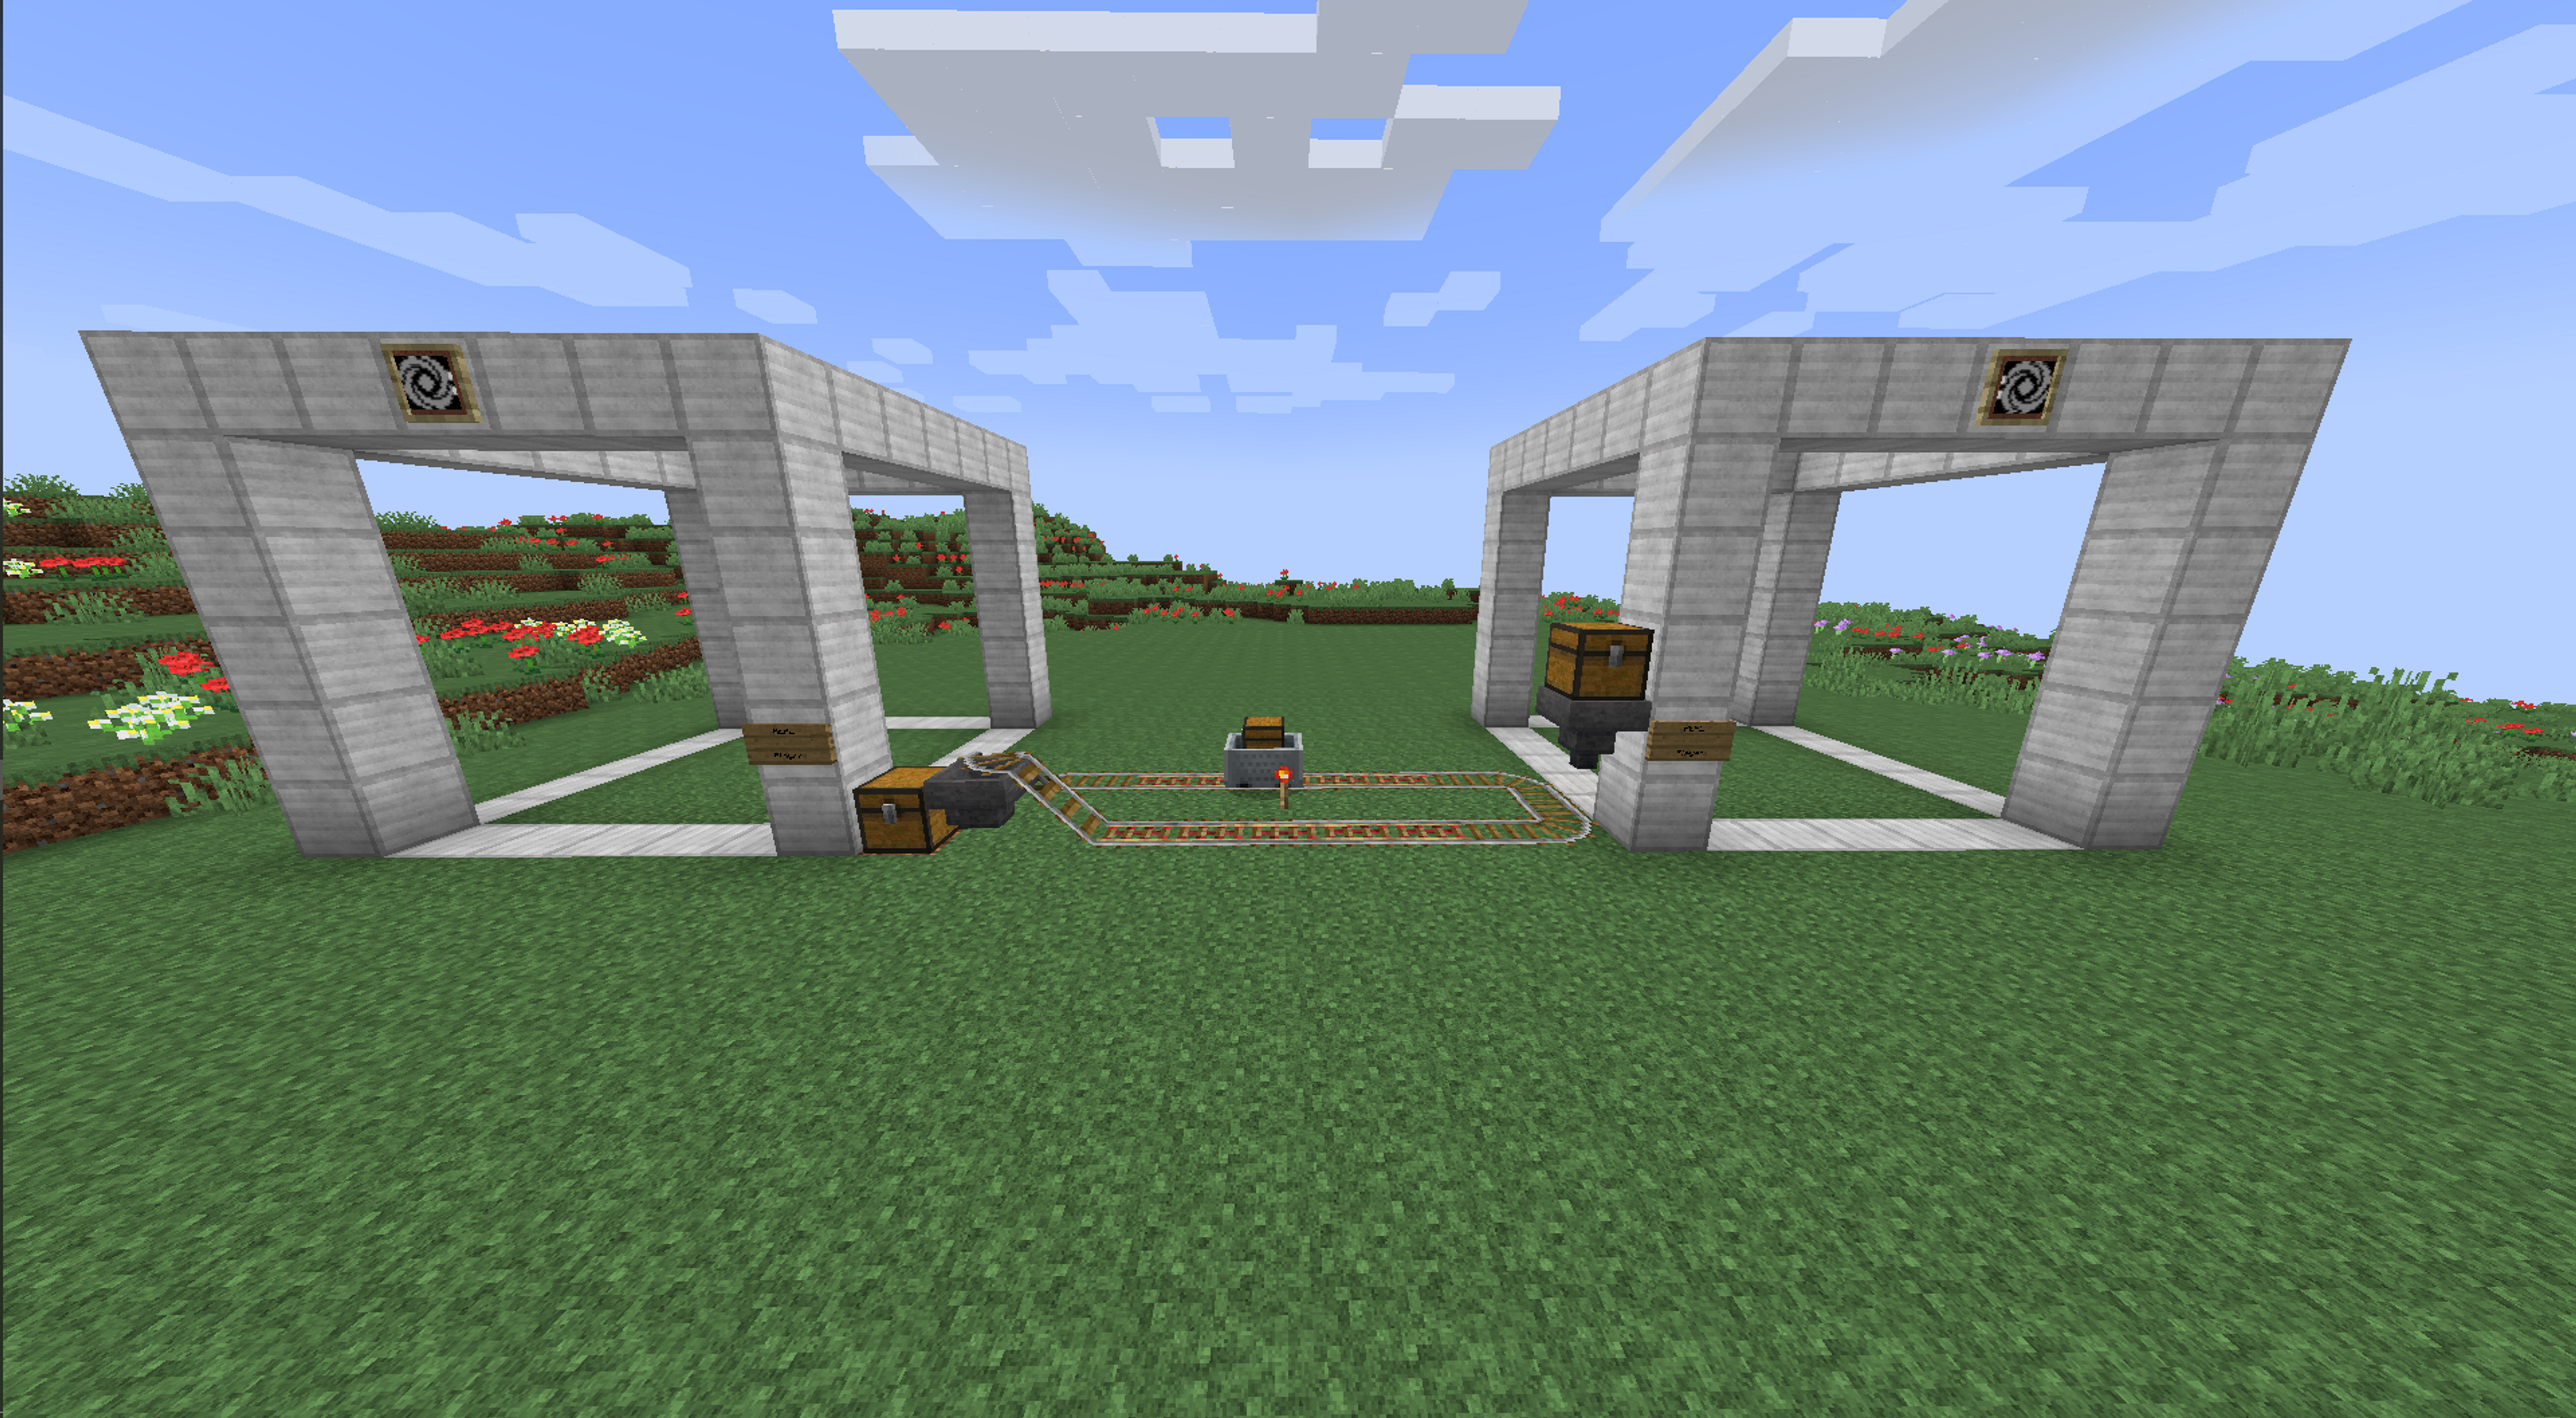 Two structures connected via minecart